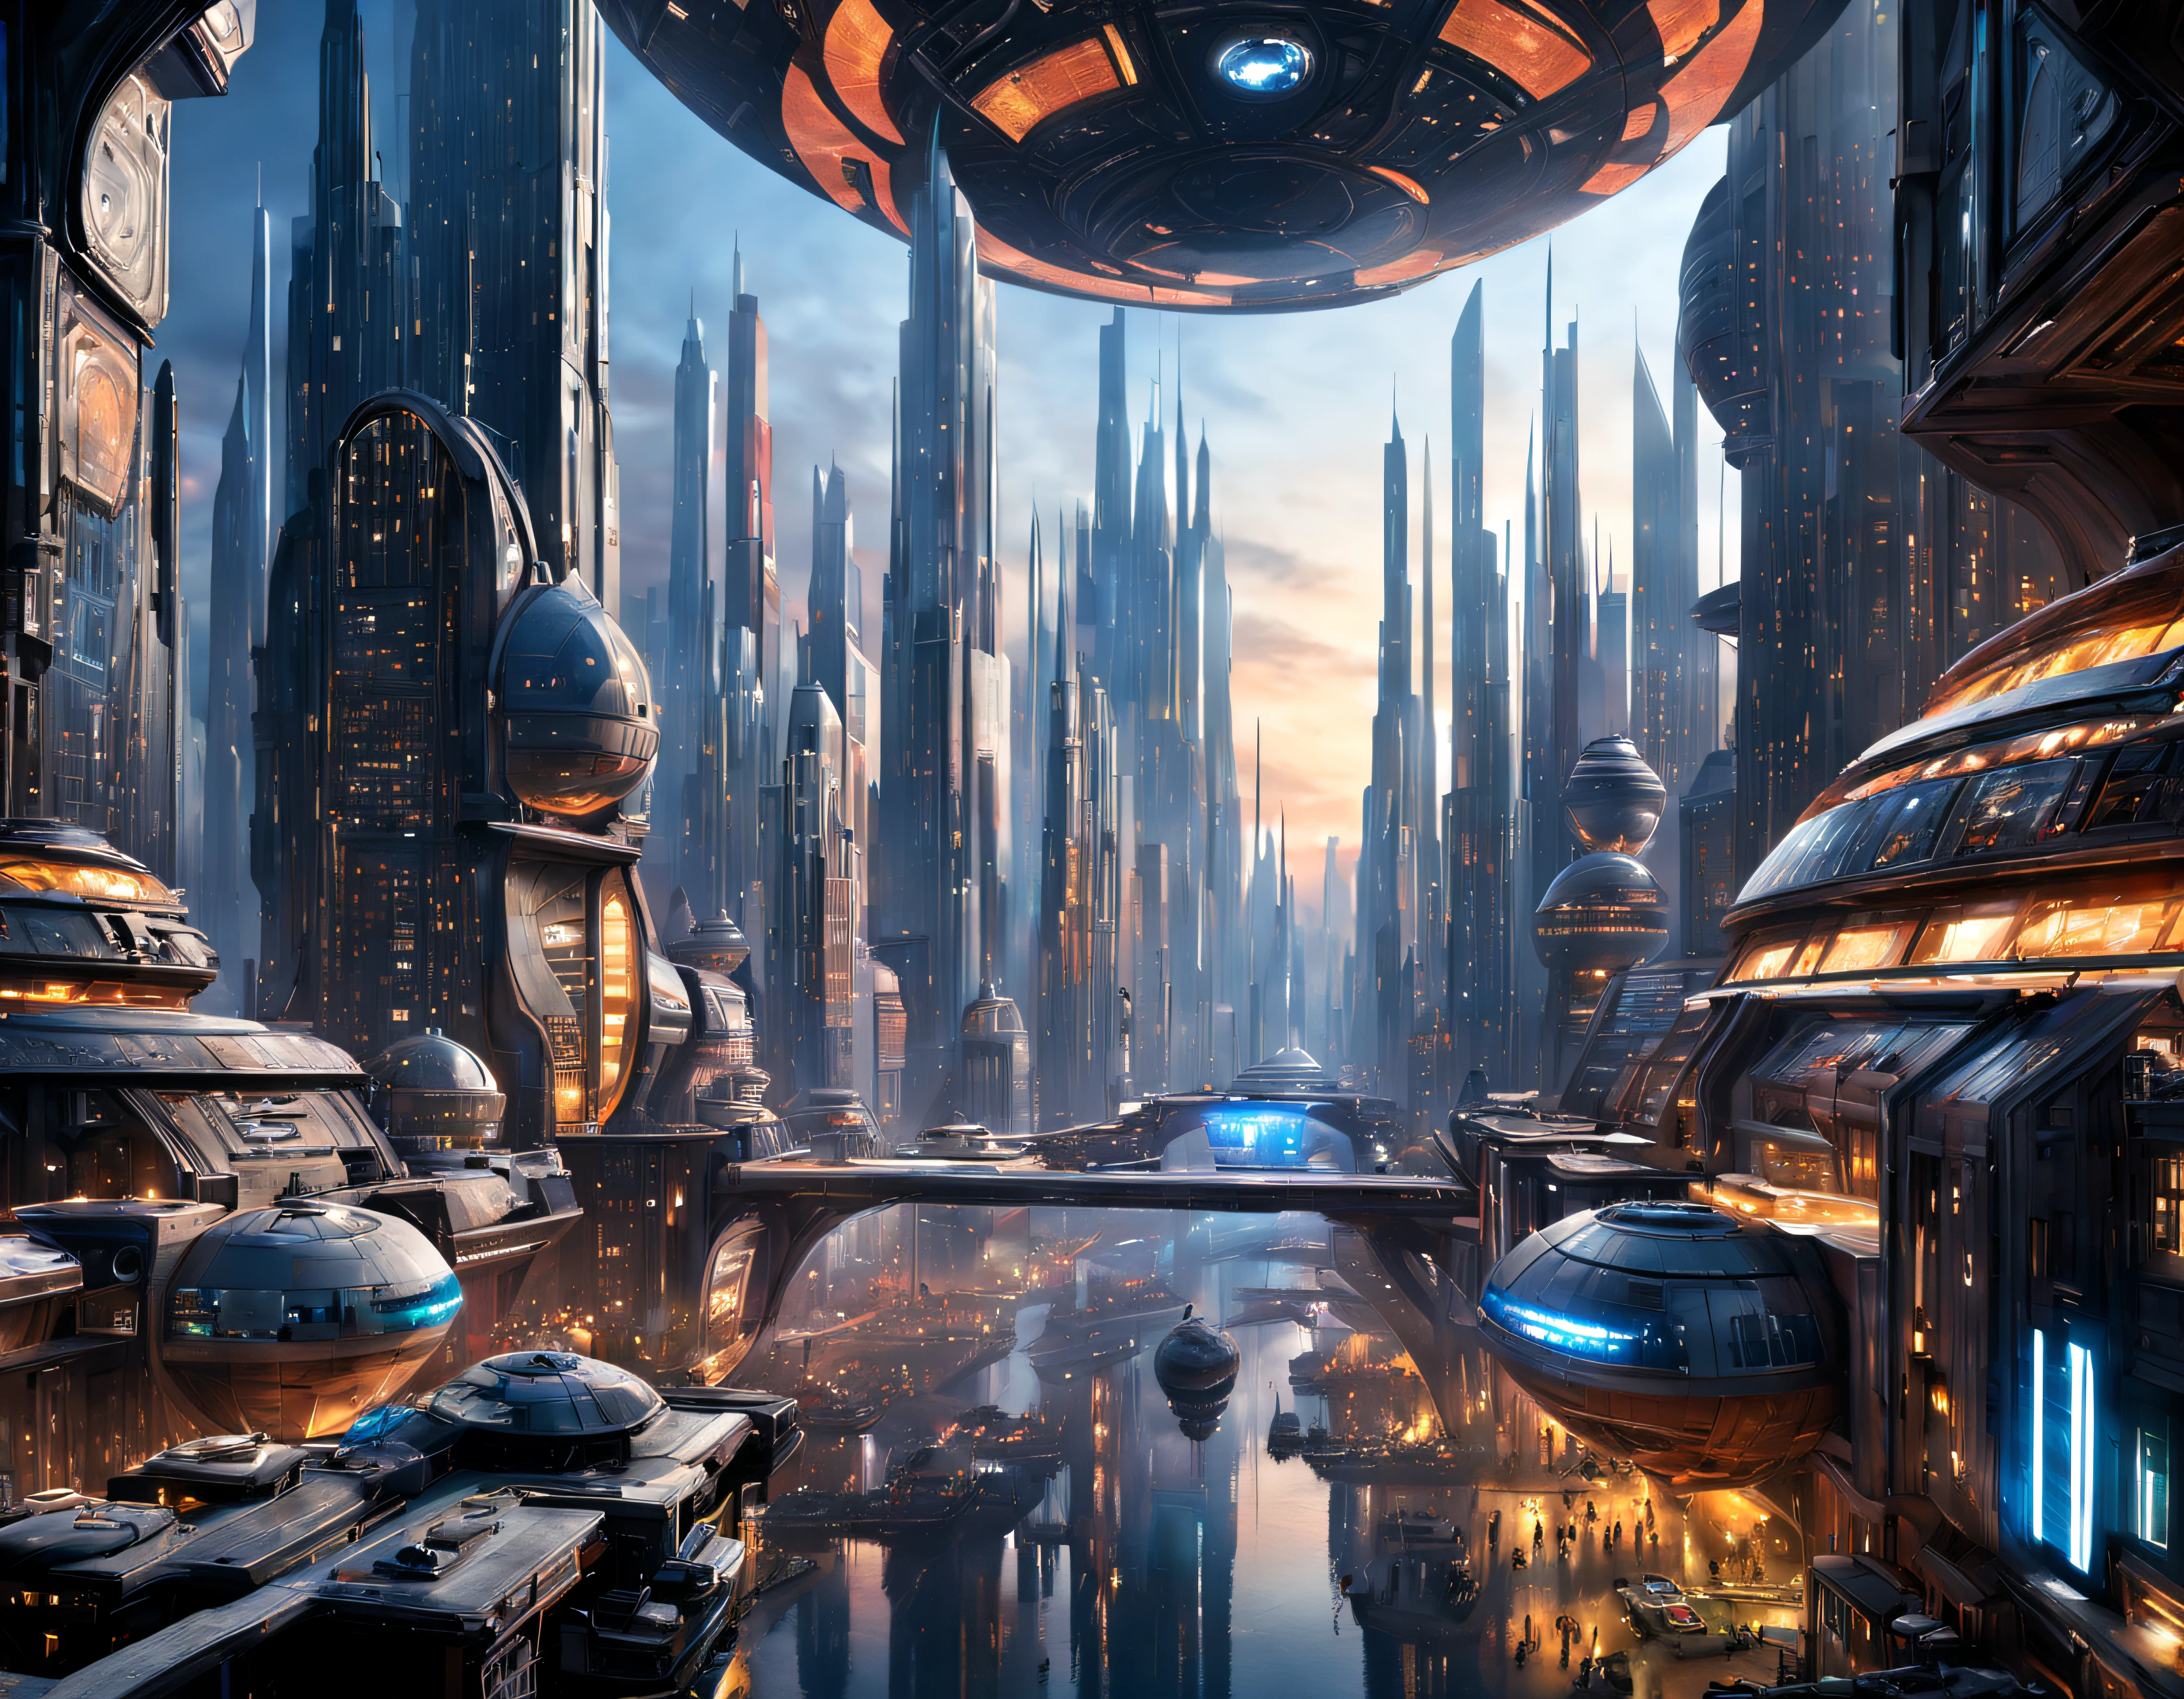 (The city of Coruscant from Star Wars as designed by Doug Chiang), futuristic fantasy city with immense buildings of technological design (that form an infinite avenue), non-blurred compactor buildings with metallic appearance, lights in windows in buildings, daytime lighting with sun, with spectacular glass structures, (with bright colors). sunny pavement (dull). people walking. well defined image with many buildings together. sharp well defined 8k image. the buildings reach high into the background.,8k. cinematographic image